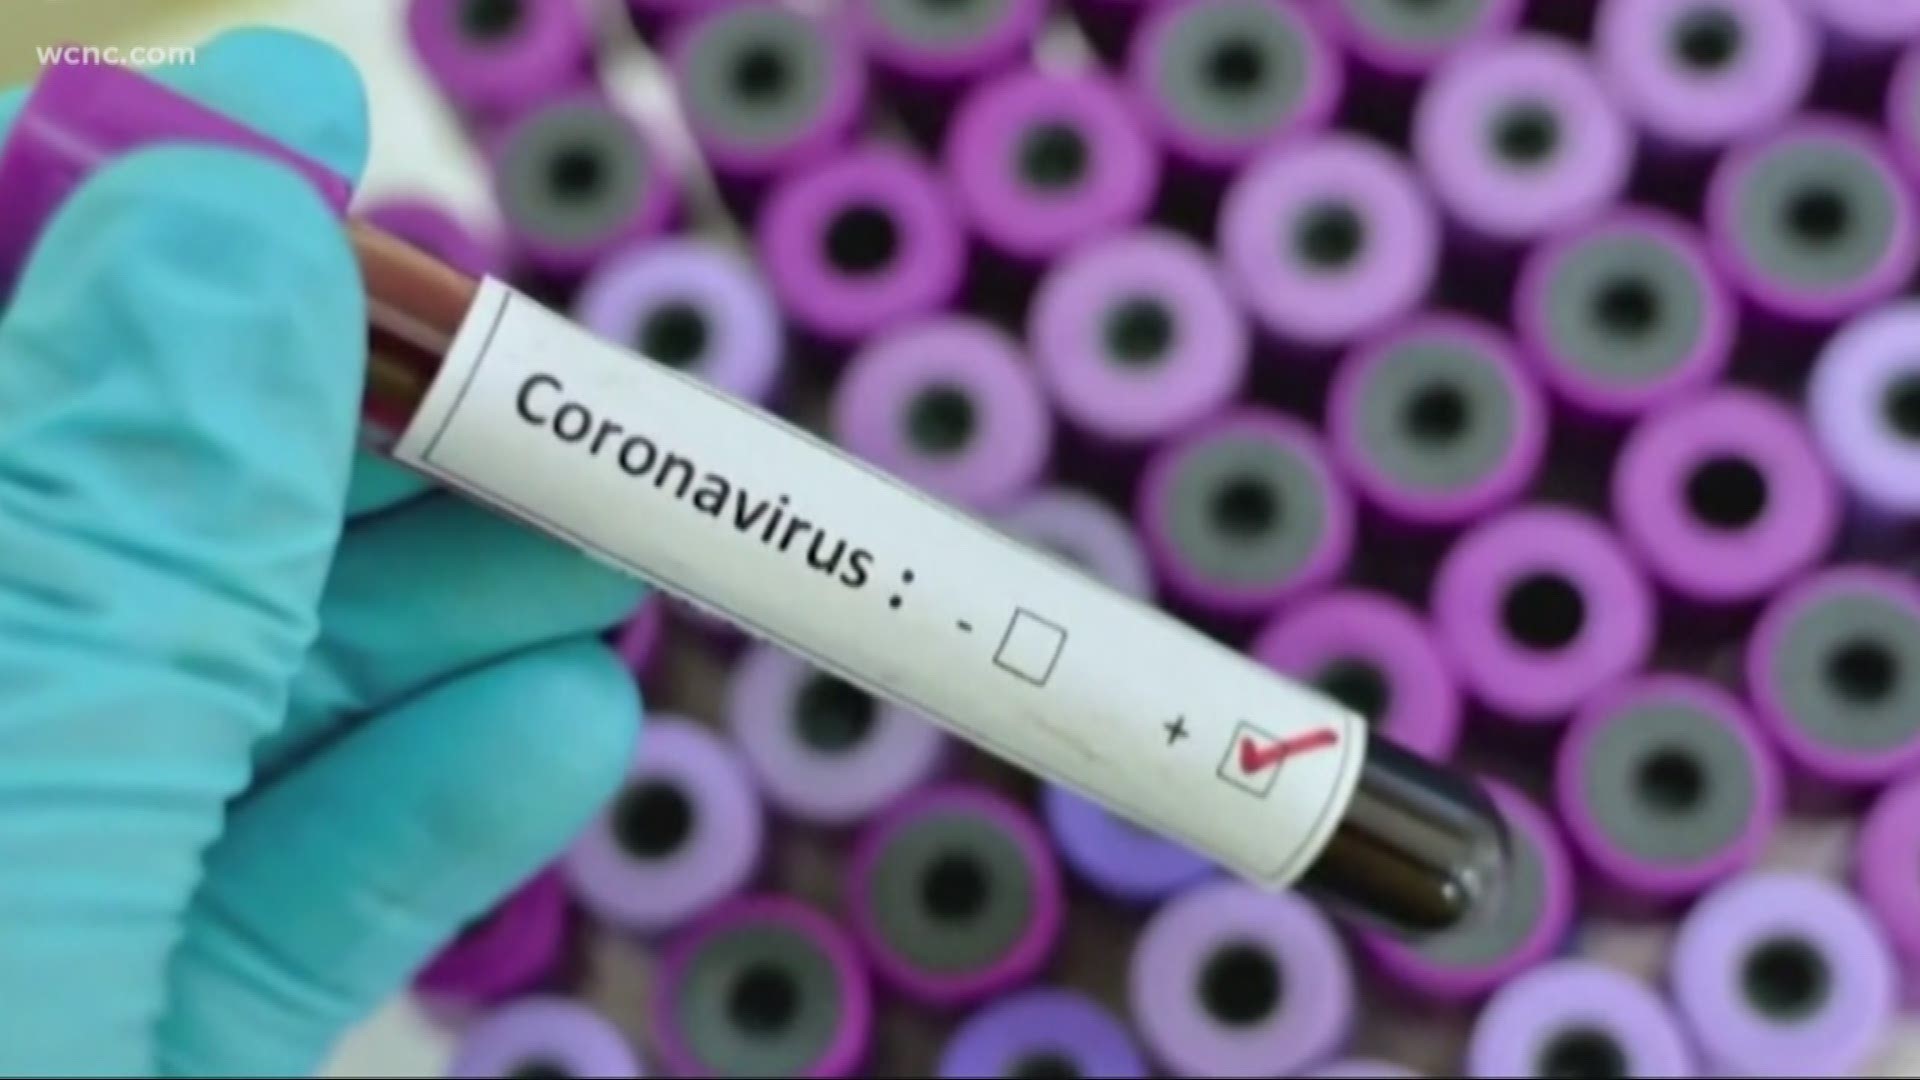 In York County, there are 11 confirmed cases of coronavirus. Leaders there now suspending all in-person public meetings until further notice.